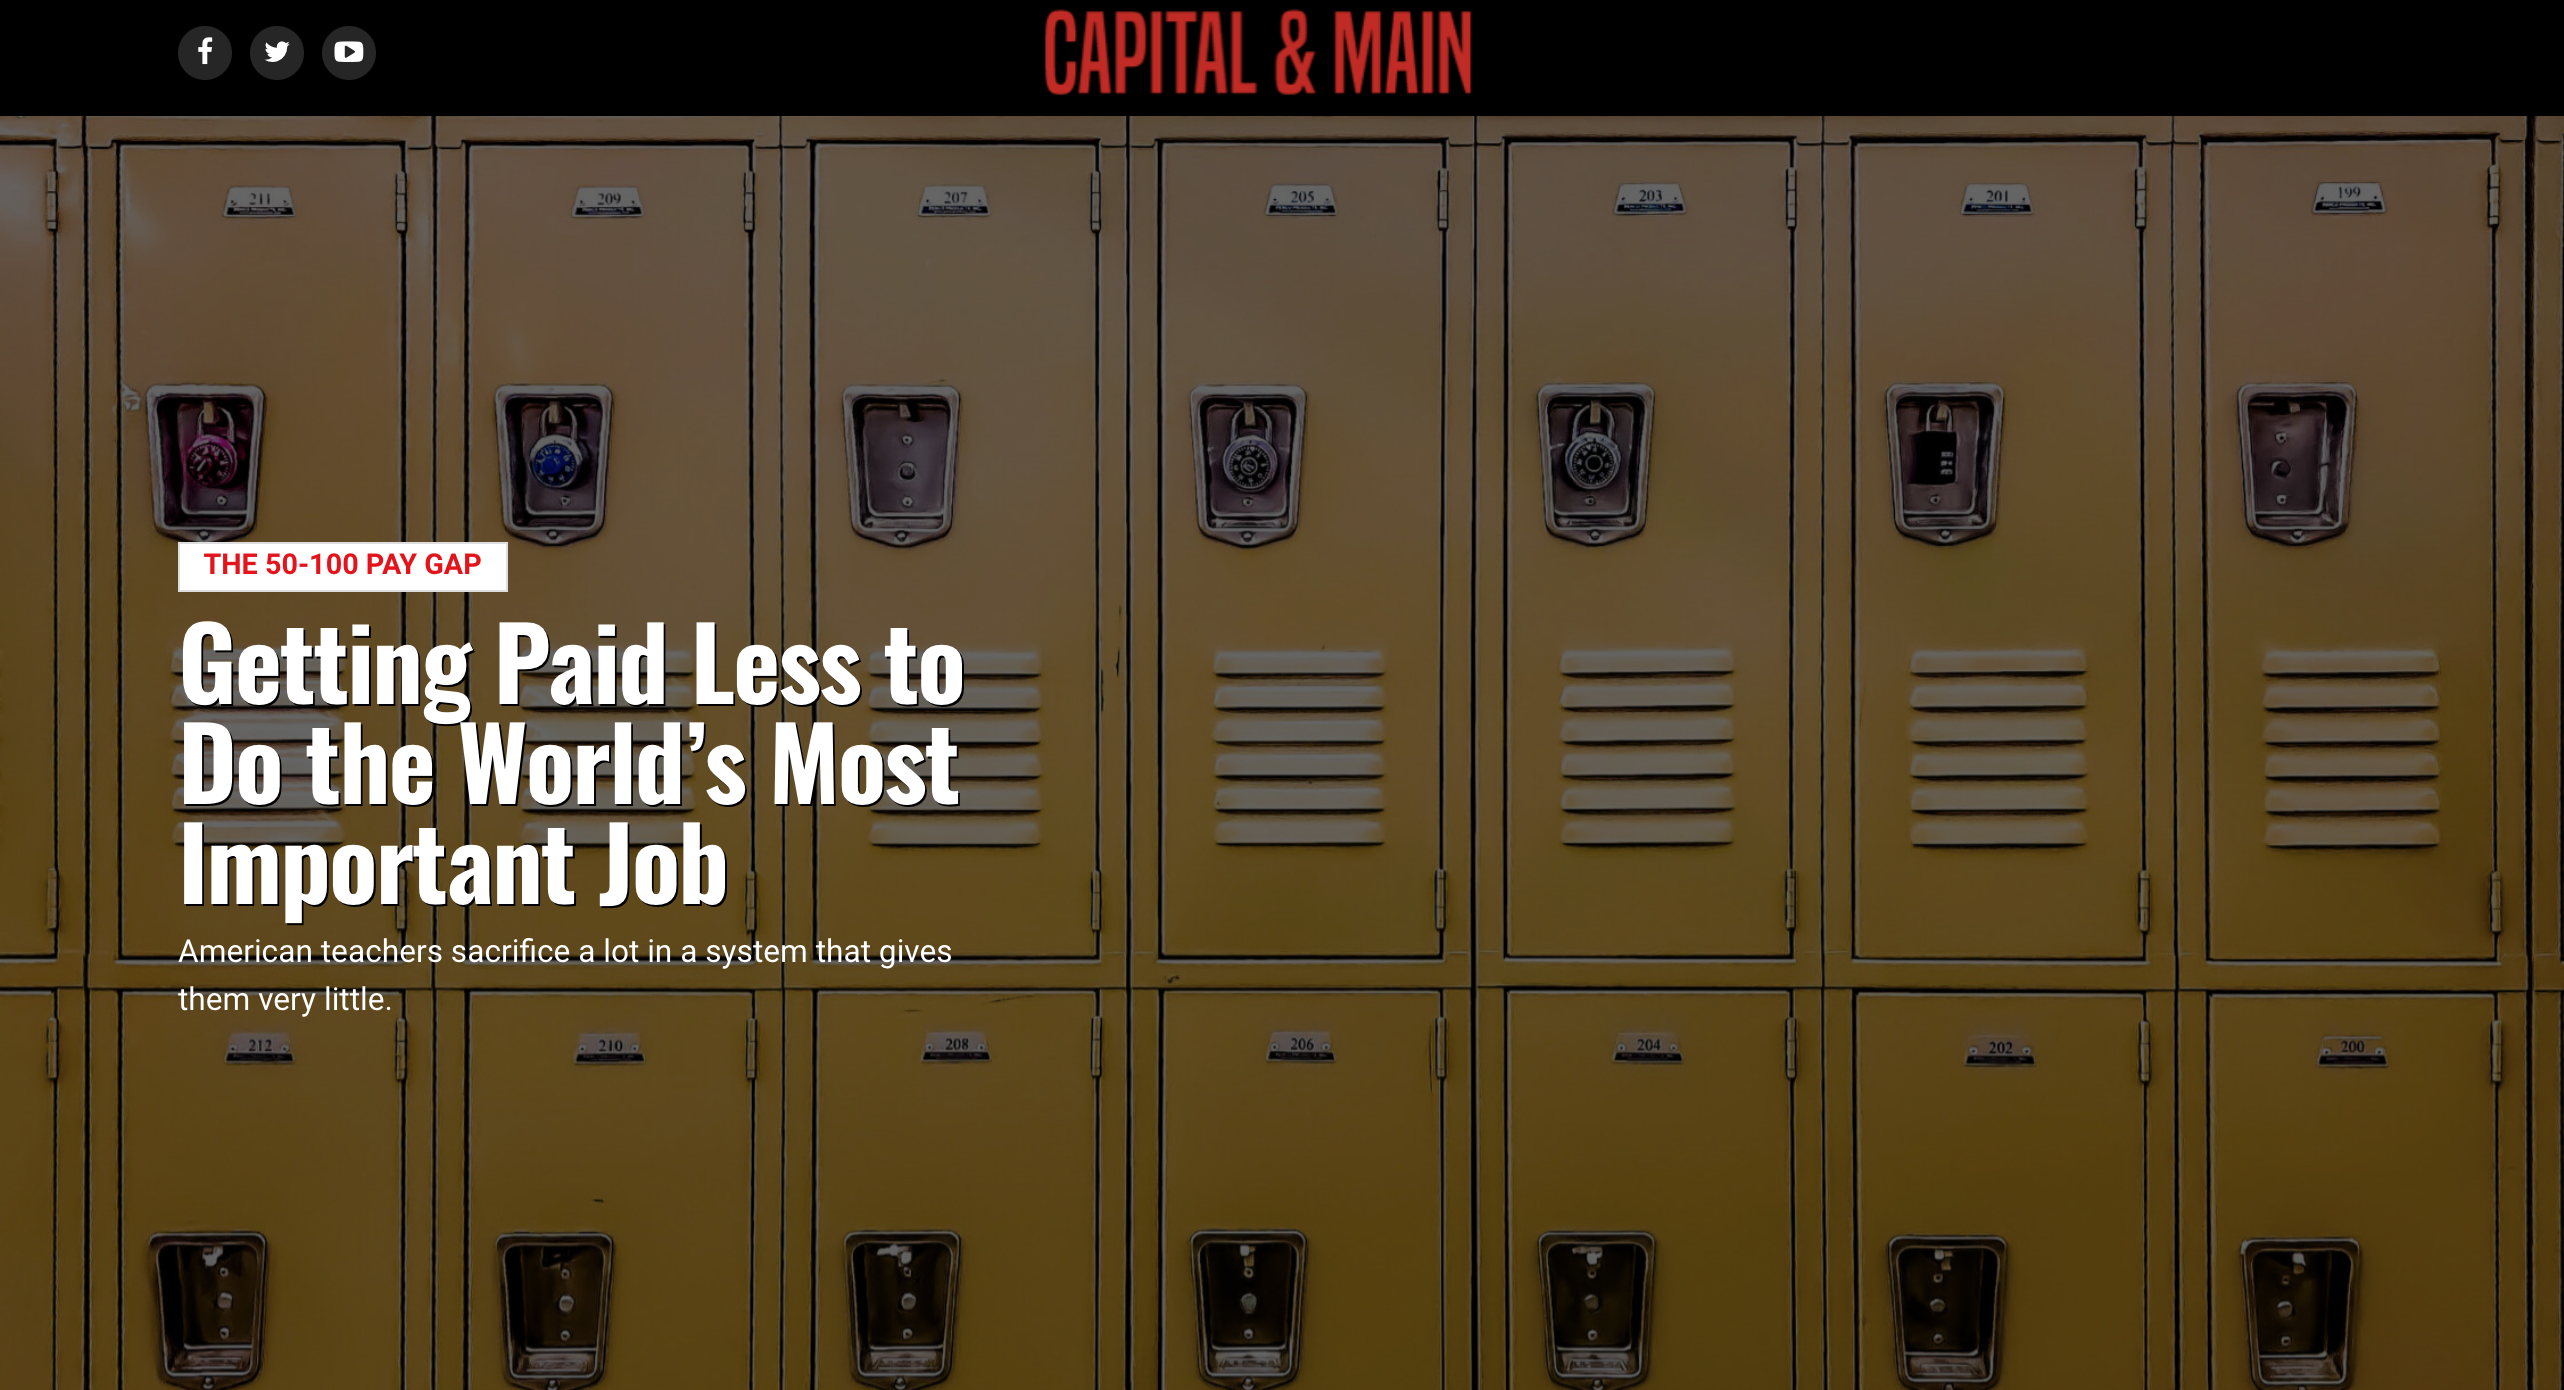 Capital & Main: Getting Paid Less to Do the World’s Most Important Job